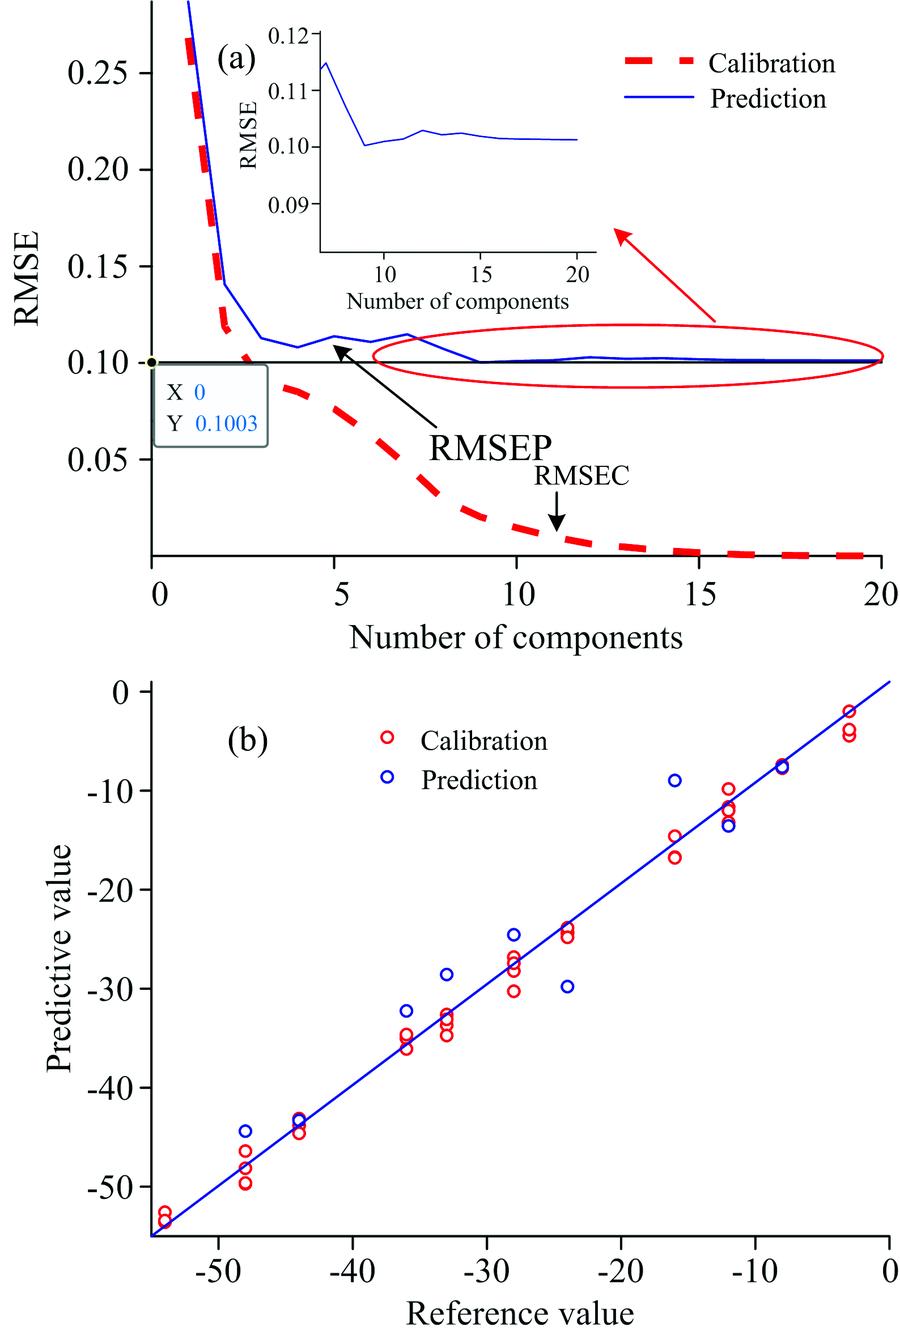 (a) Relationship between residuals errors of calibration set (RMSEC) and prediction set (RMSEP) and factor numbers; (b) Prediction results of condensation point under the environment temperature of 25 ℃